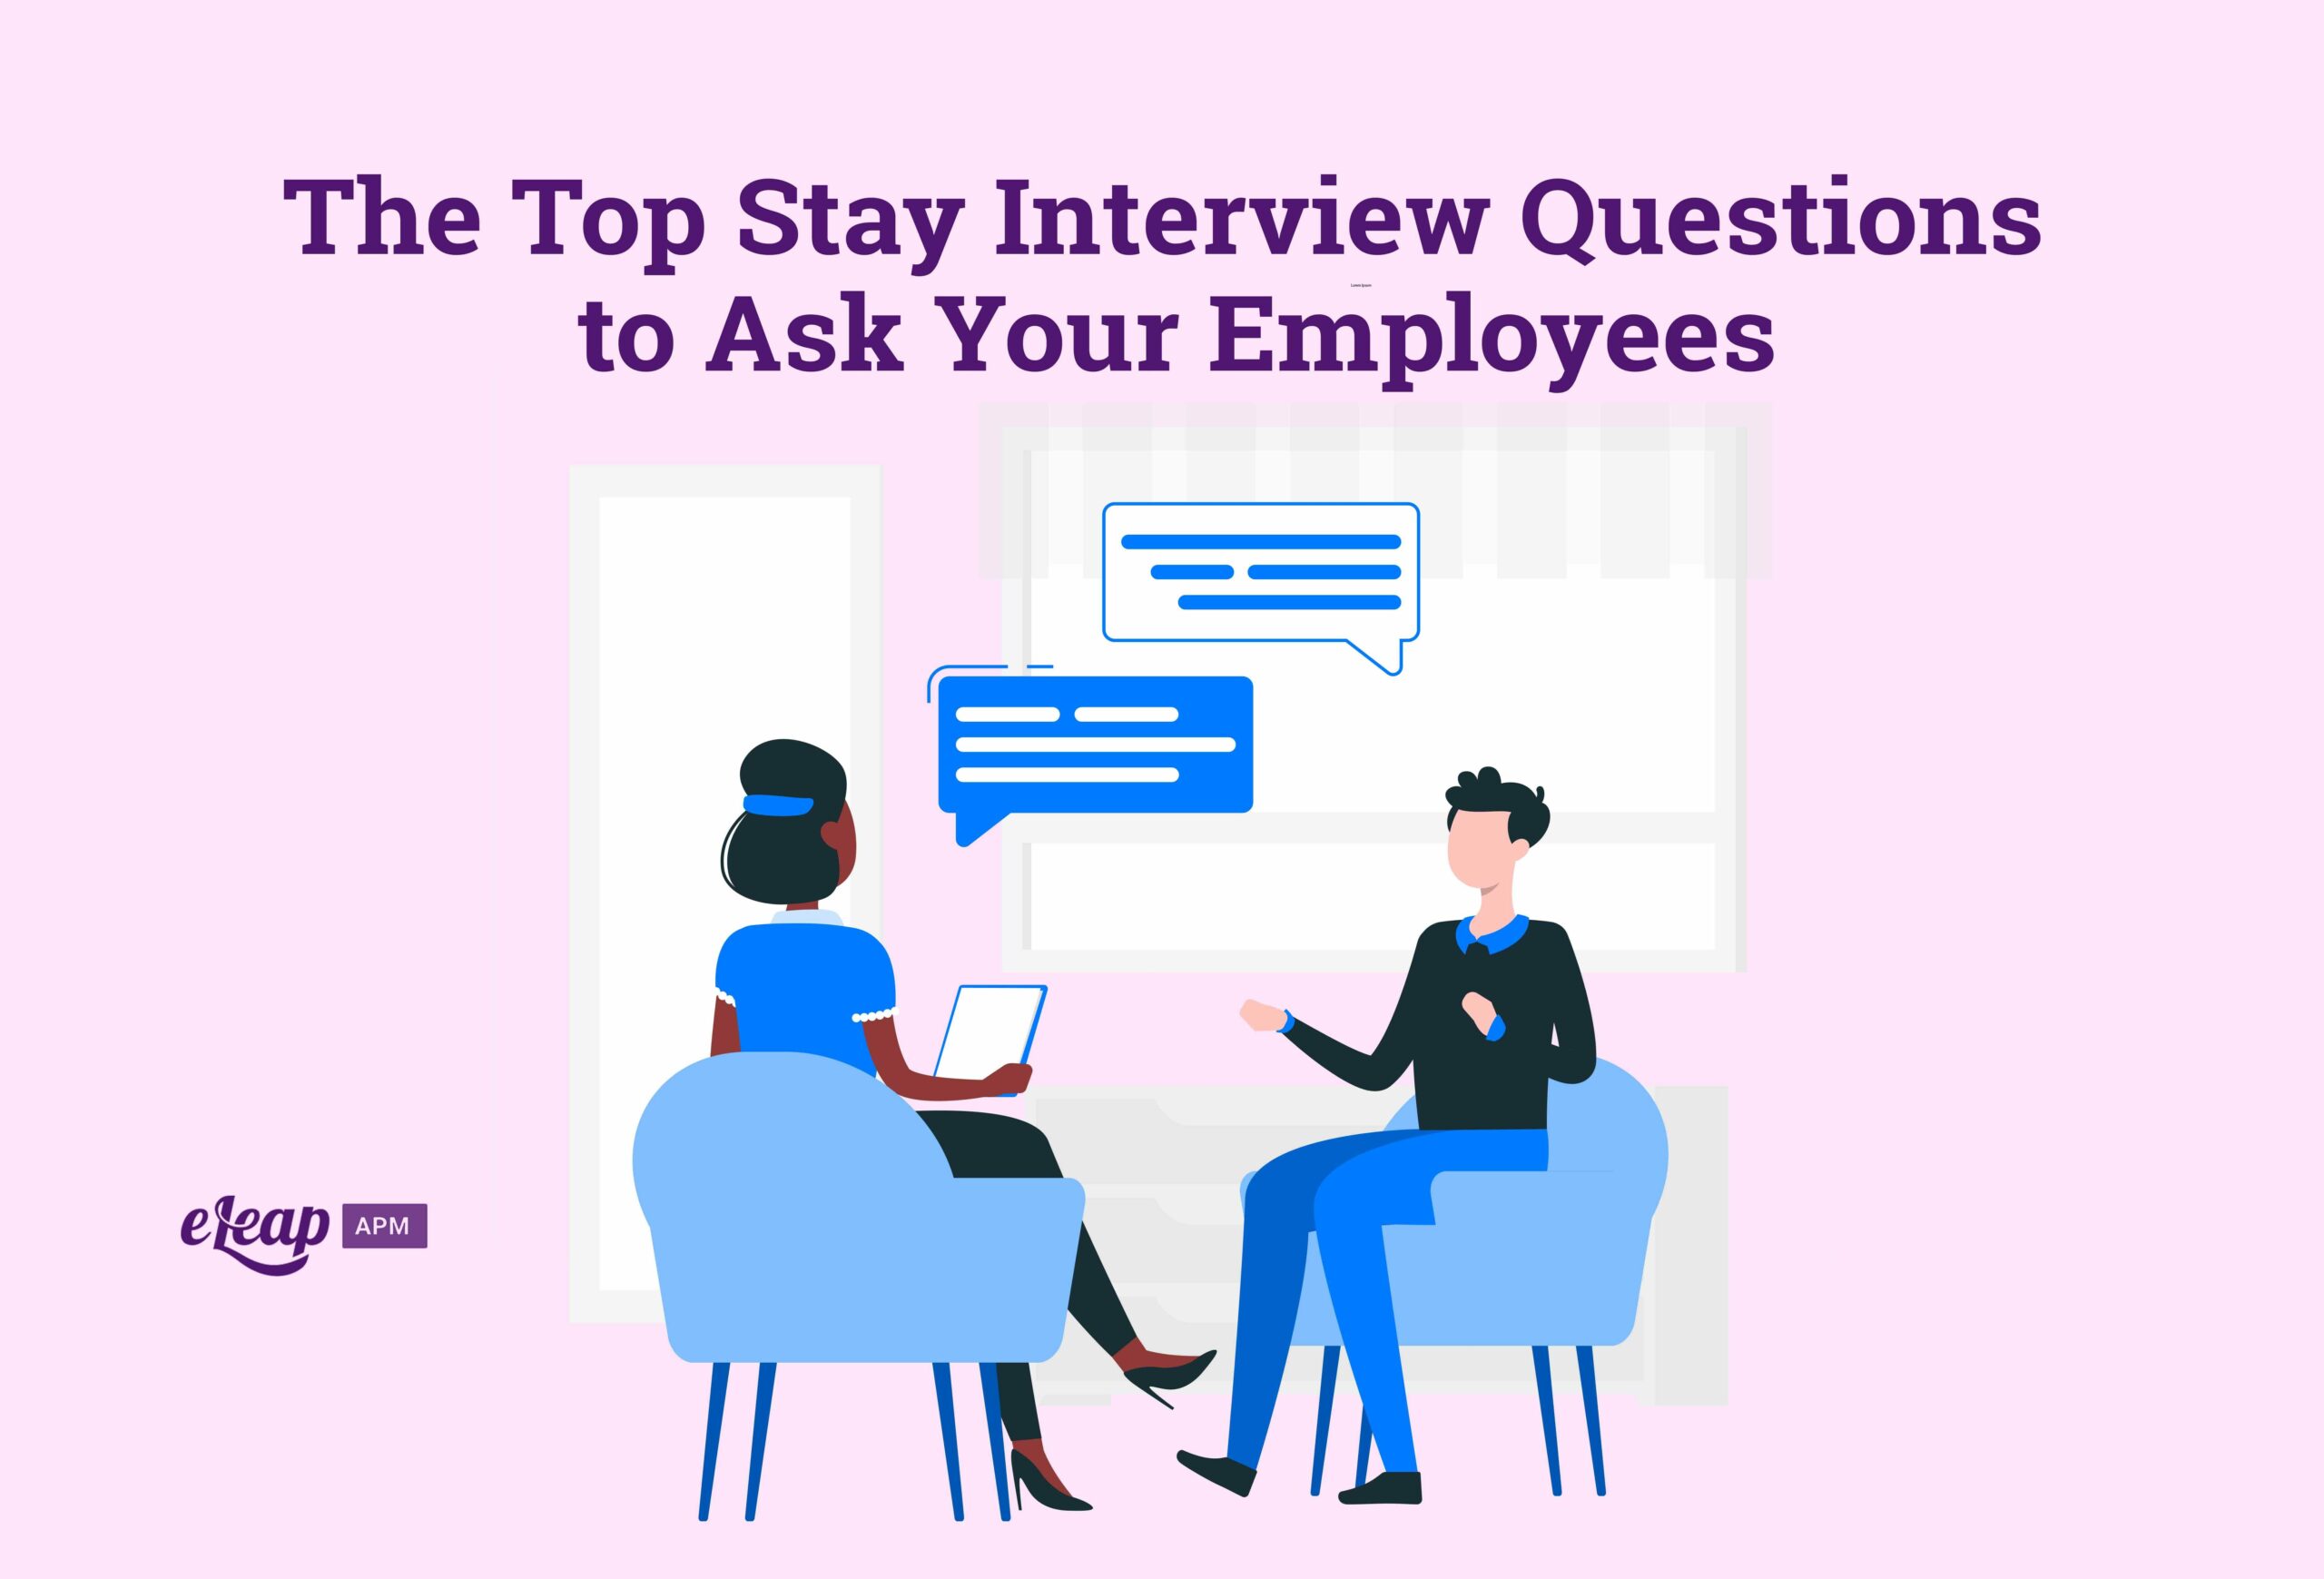 The Top Stay Interview Questions to Ask Your Employees